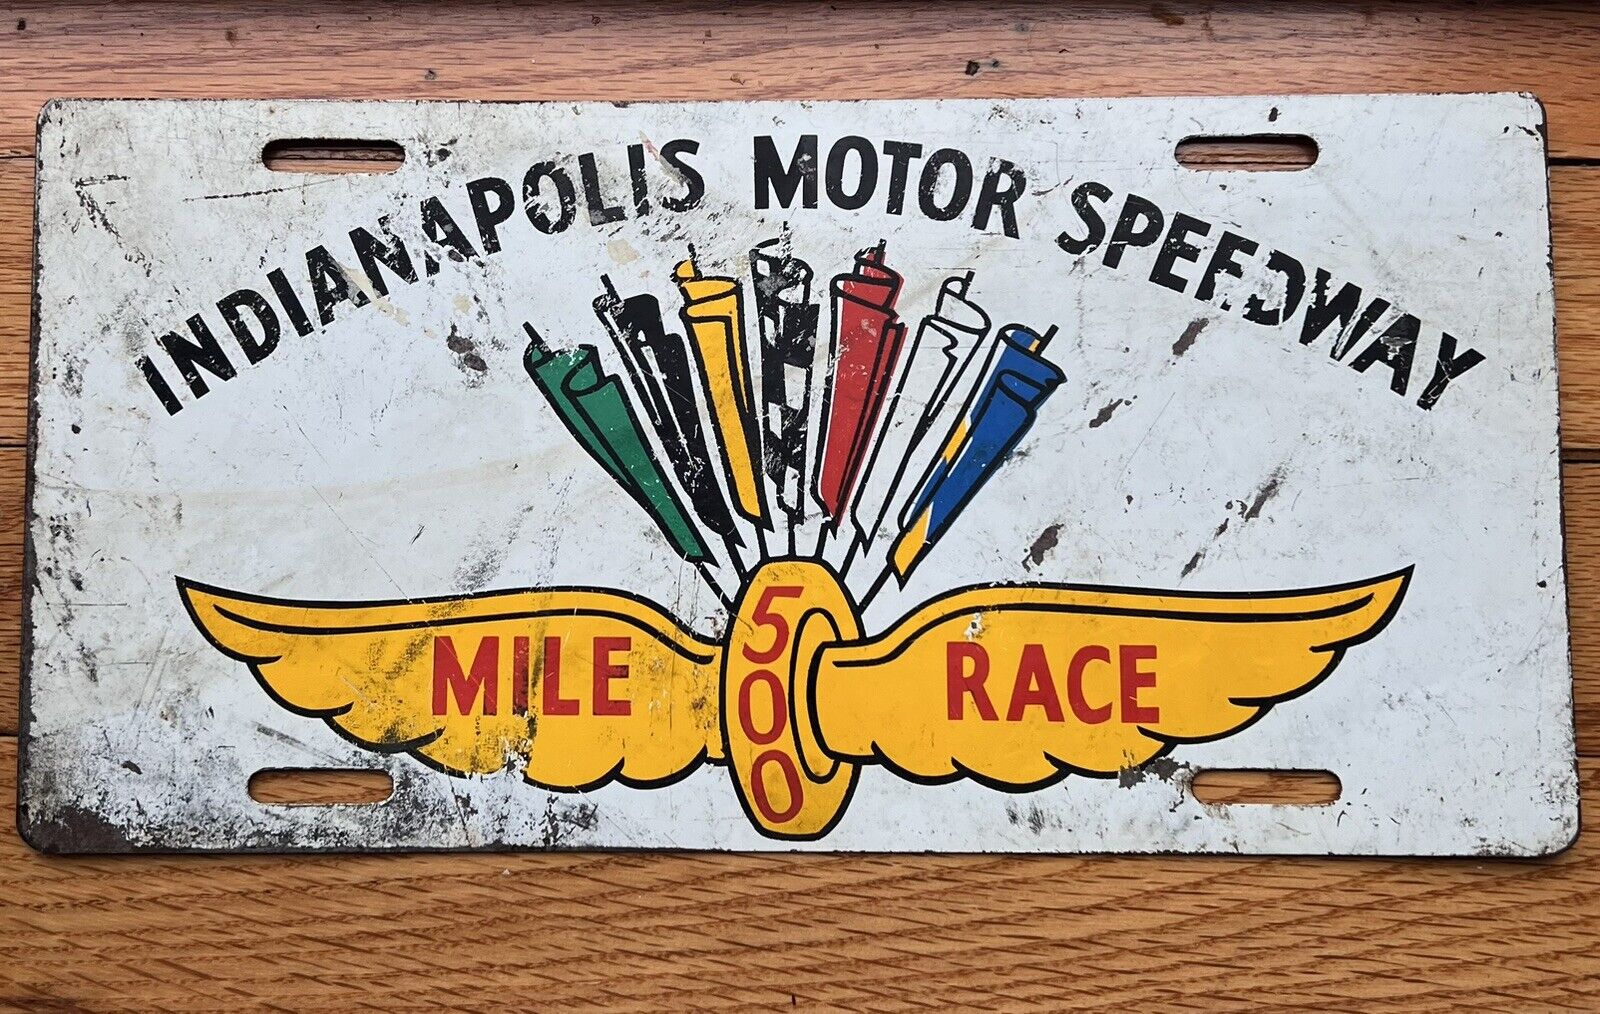 rare OLD VINTAGE INDIANAPOLIS MOTOR SPEEDWAY 500 Mile Race metal License Plate